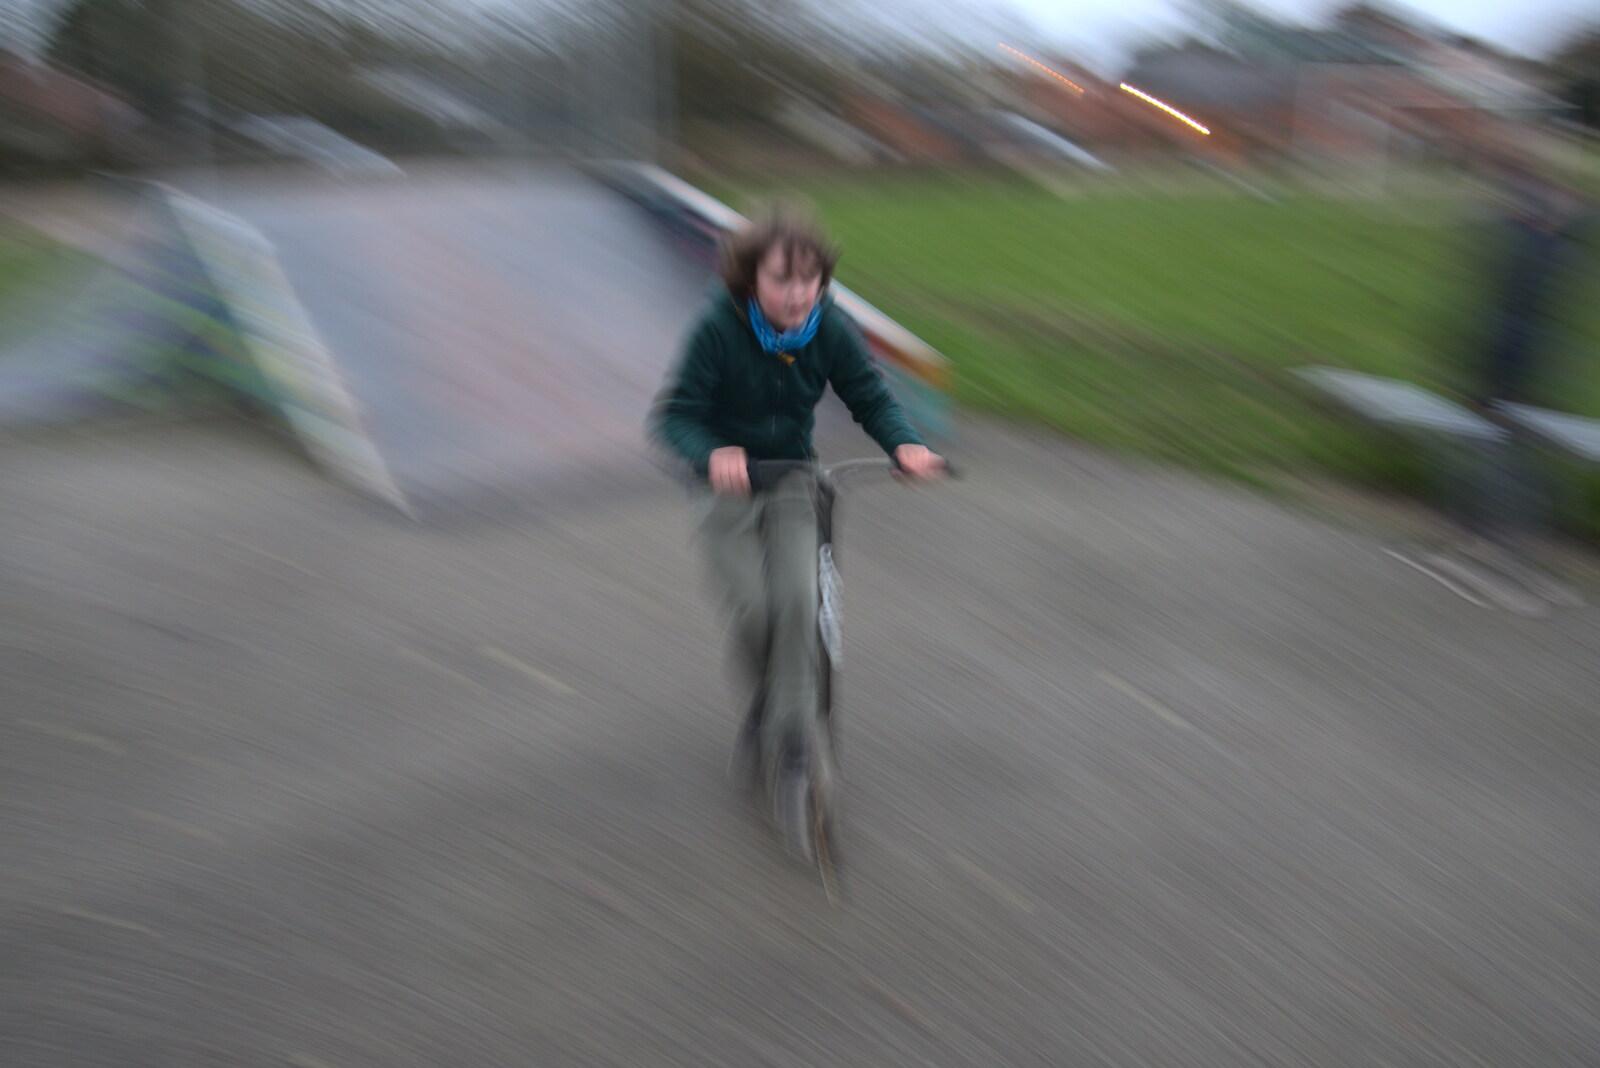 Fred is a blur of action from Scooters and a Bit of Christmas Shopping, Eye and Norwich, Norfolk - 23rd December 2021